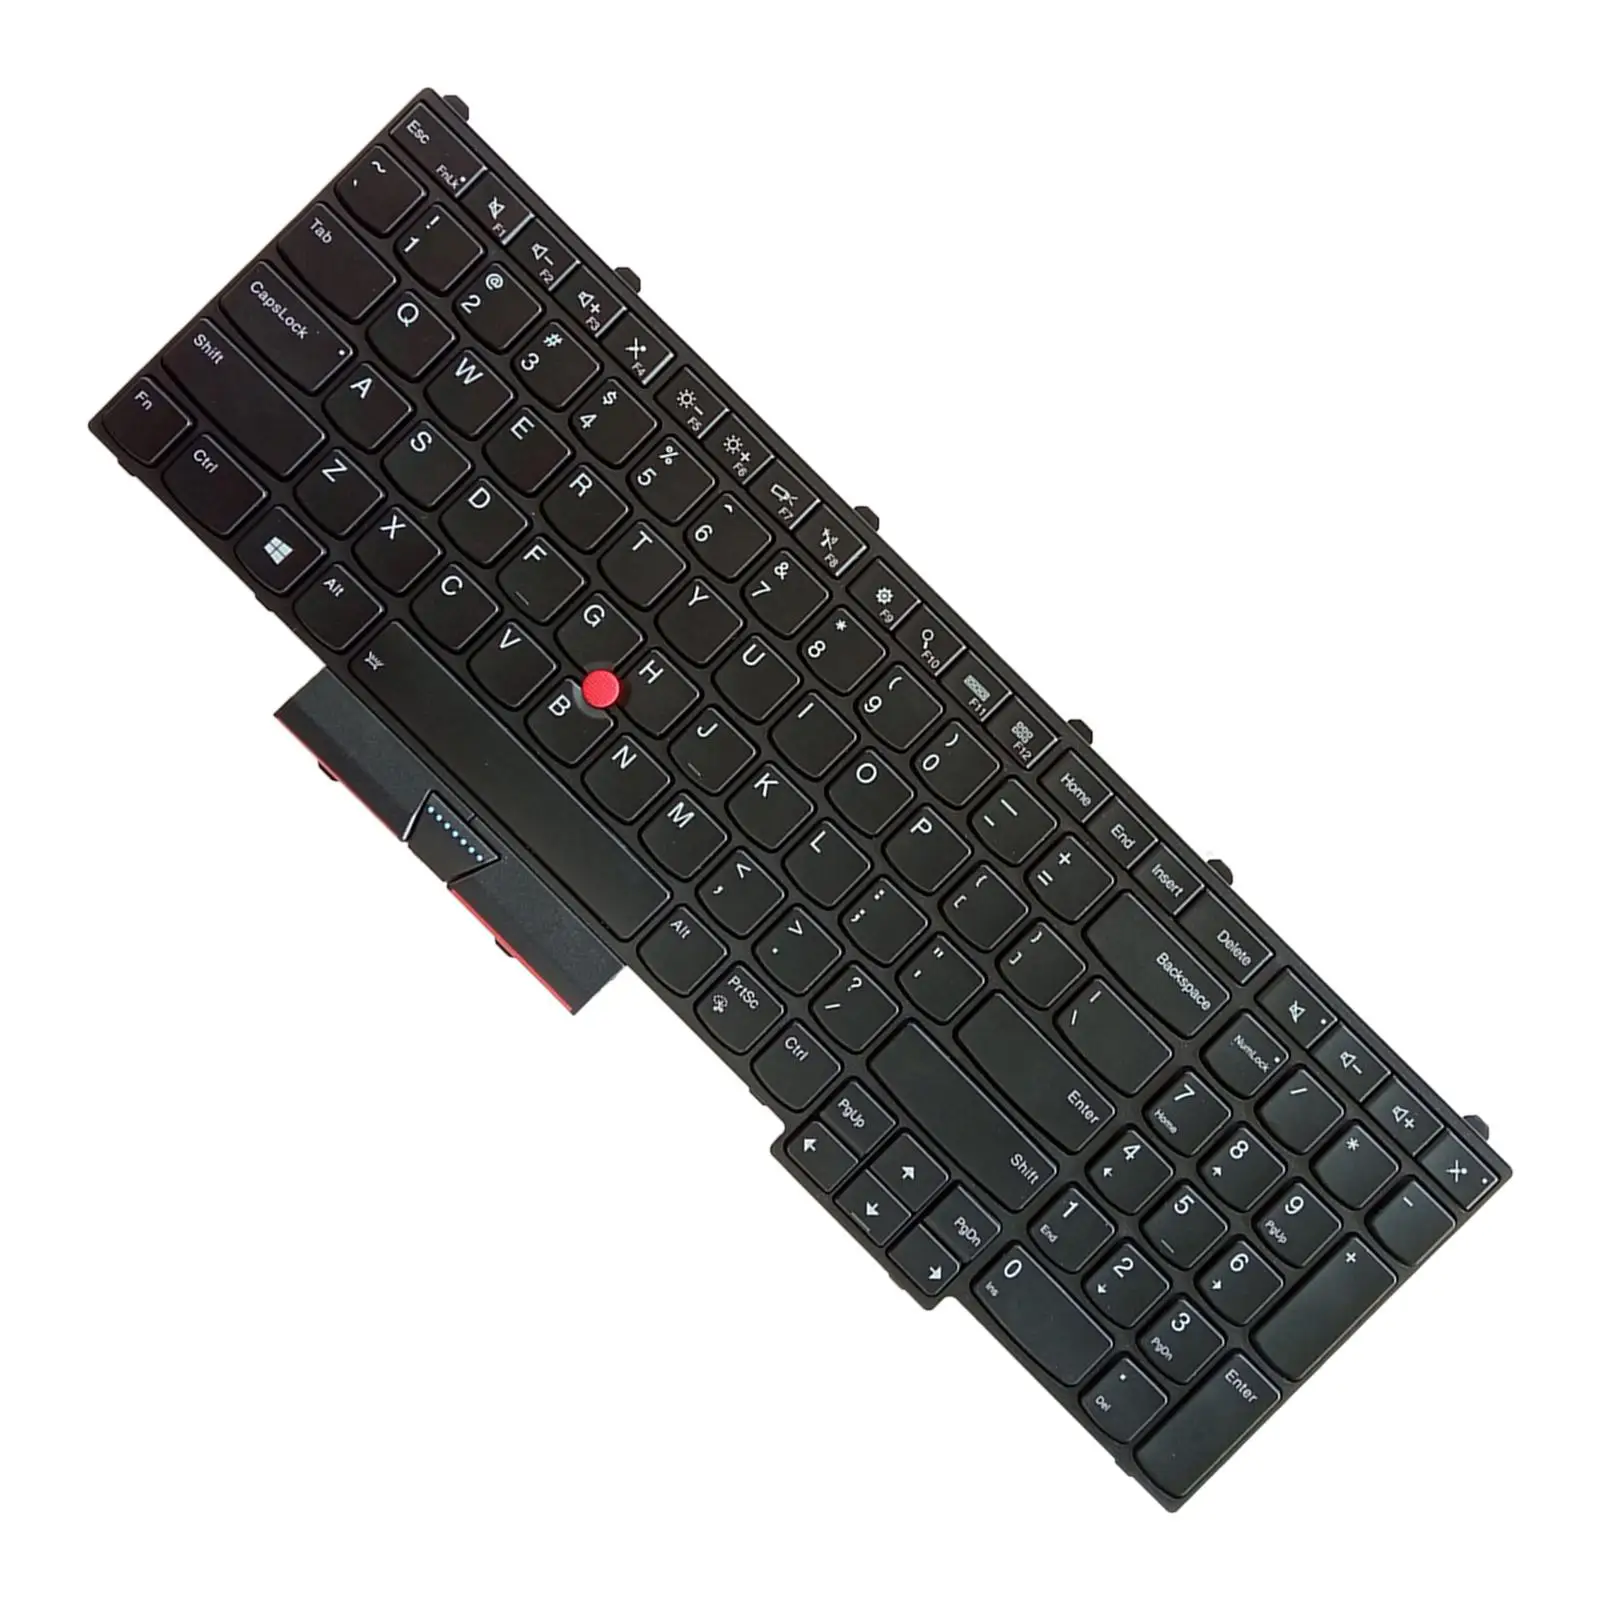 US Layout Keyboard with Backlit Replaces for ThinkPad P51 P71 No Frame Easy Install Professional Premium